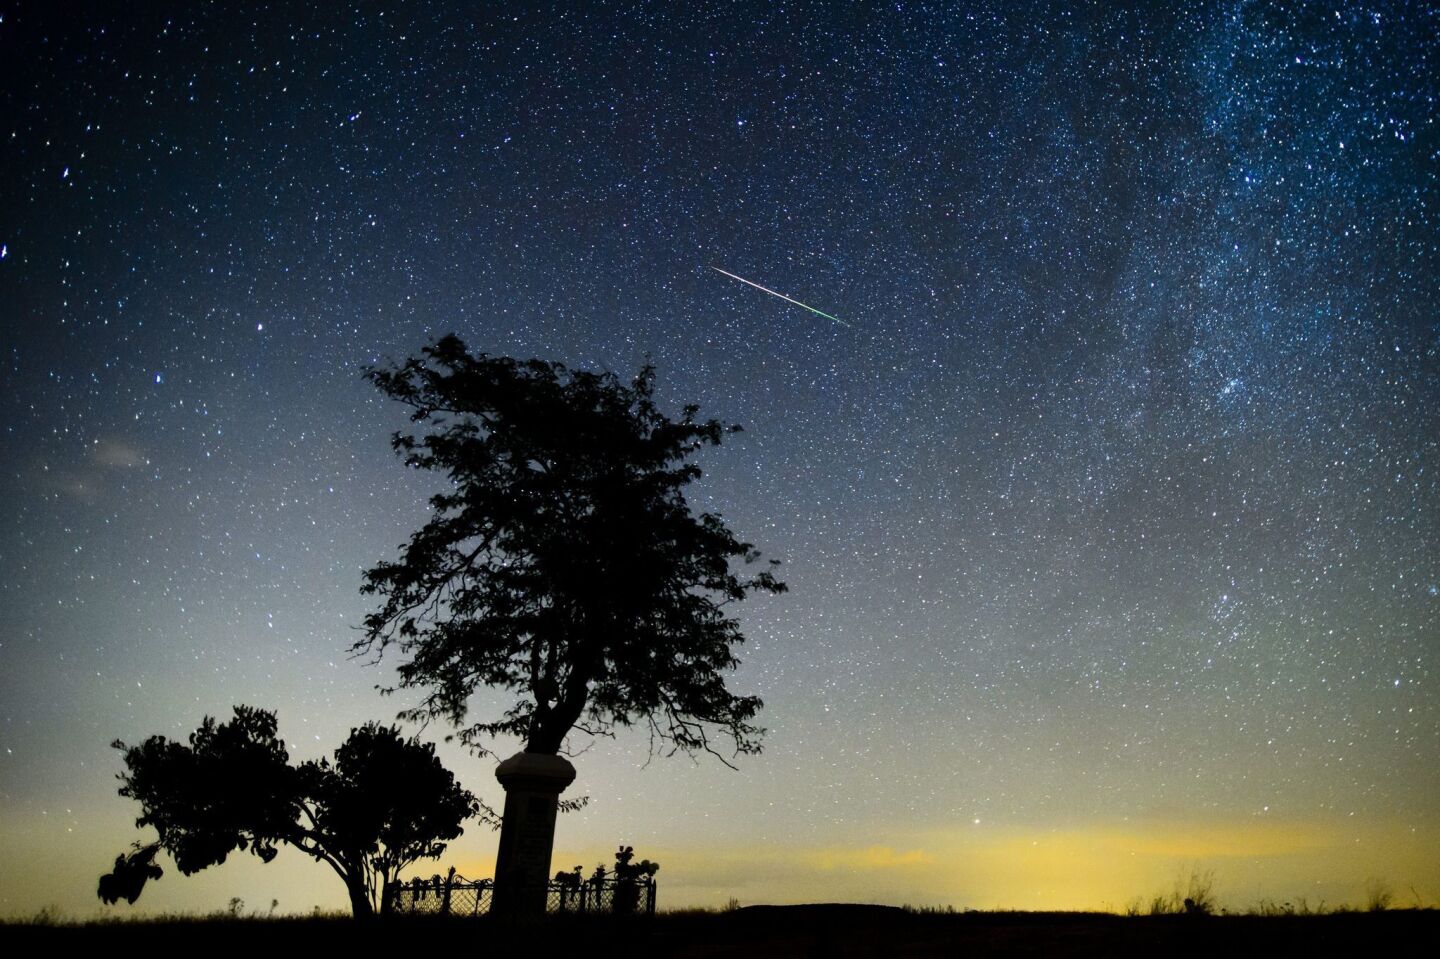 A shooting star of the Perseid meteor shower burns up in the atmosphere near Salgotarjan, northeast of Budapest.